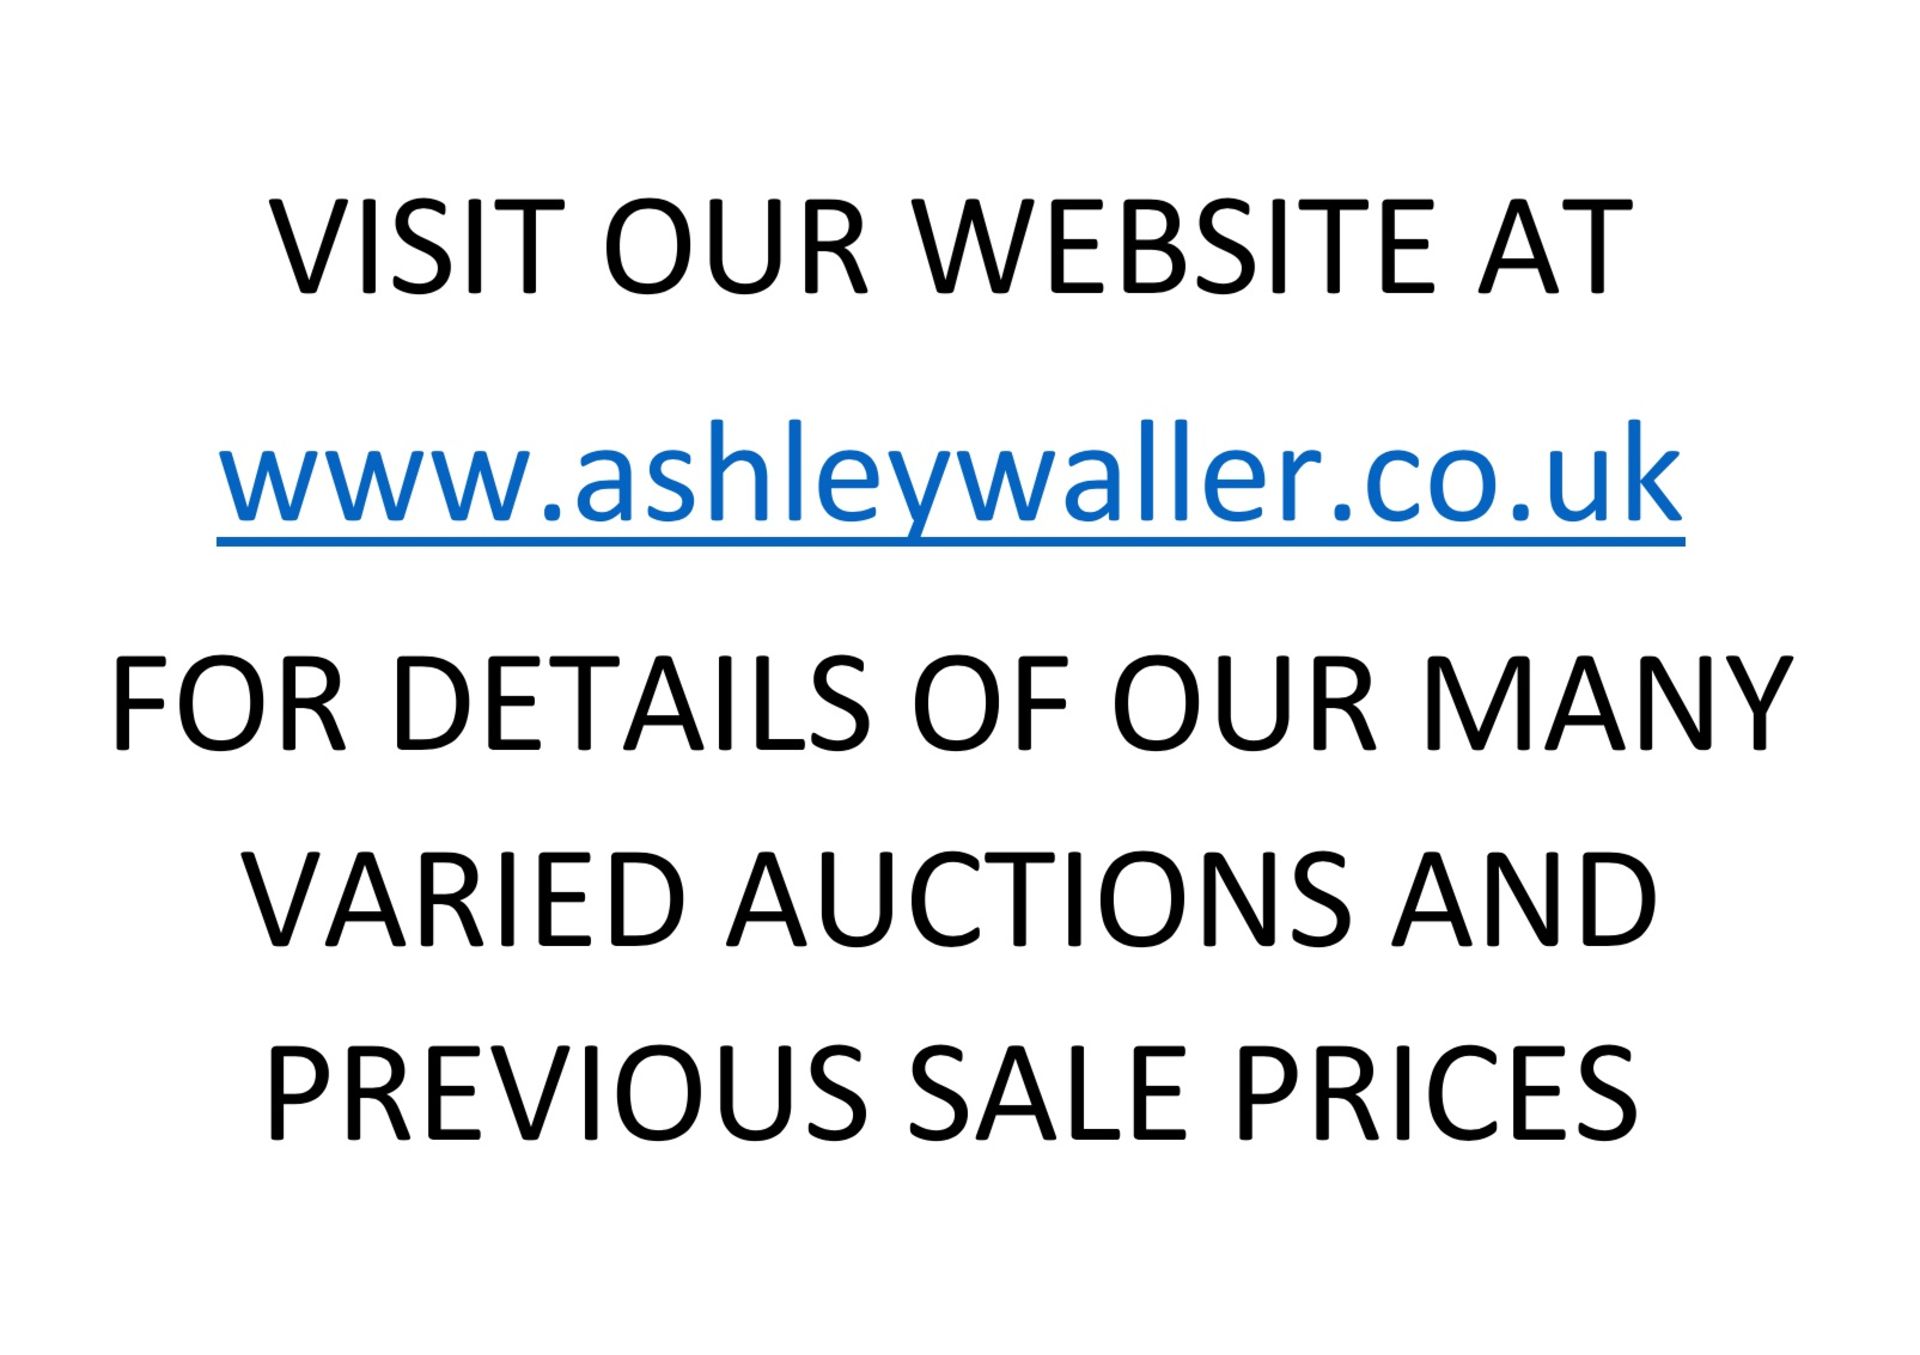 END OF SALE. THANK YOU FOR YOUR BIDDING, OUR NEXT MONTHLY MACHINERY AUCTION IS TUESDAY 10TH MAY